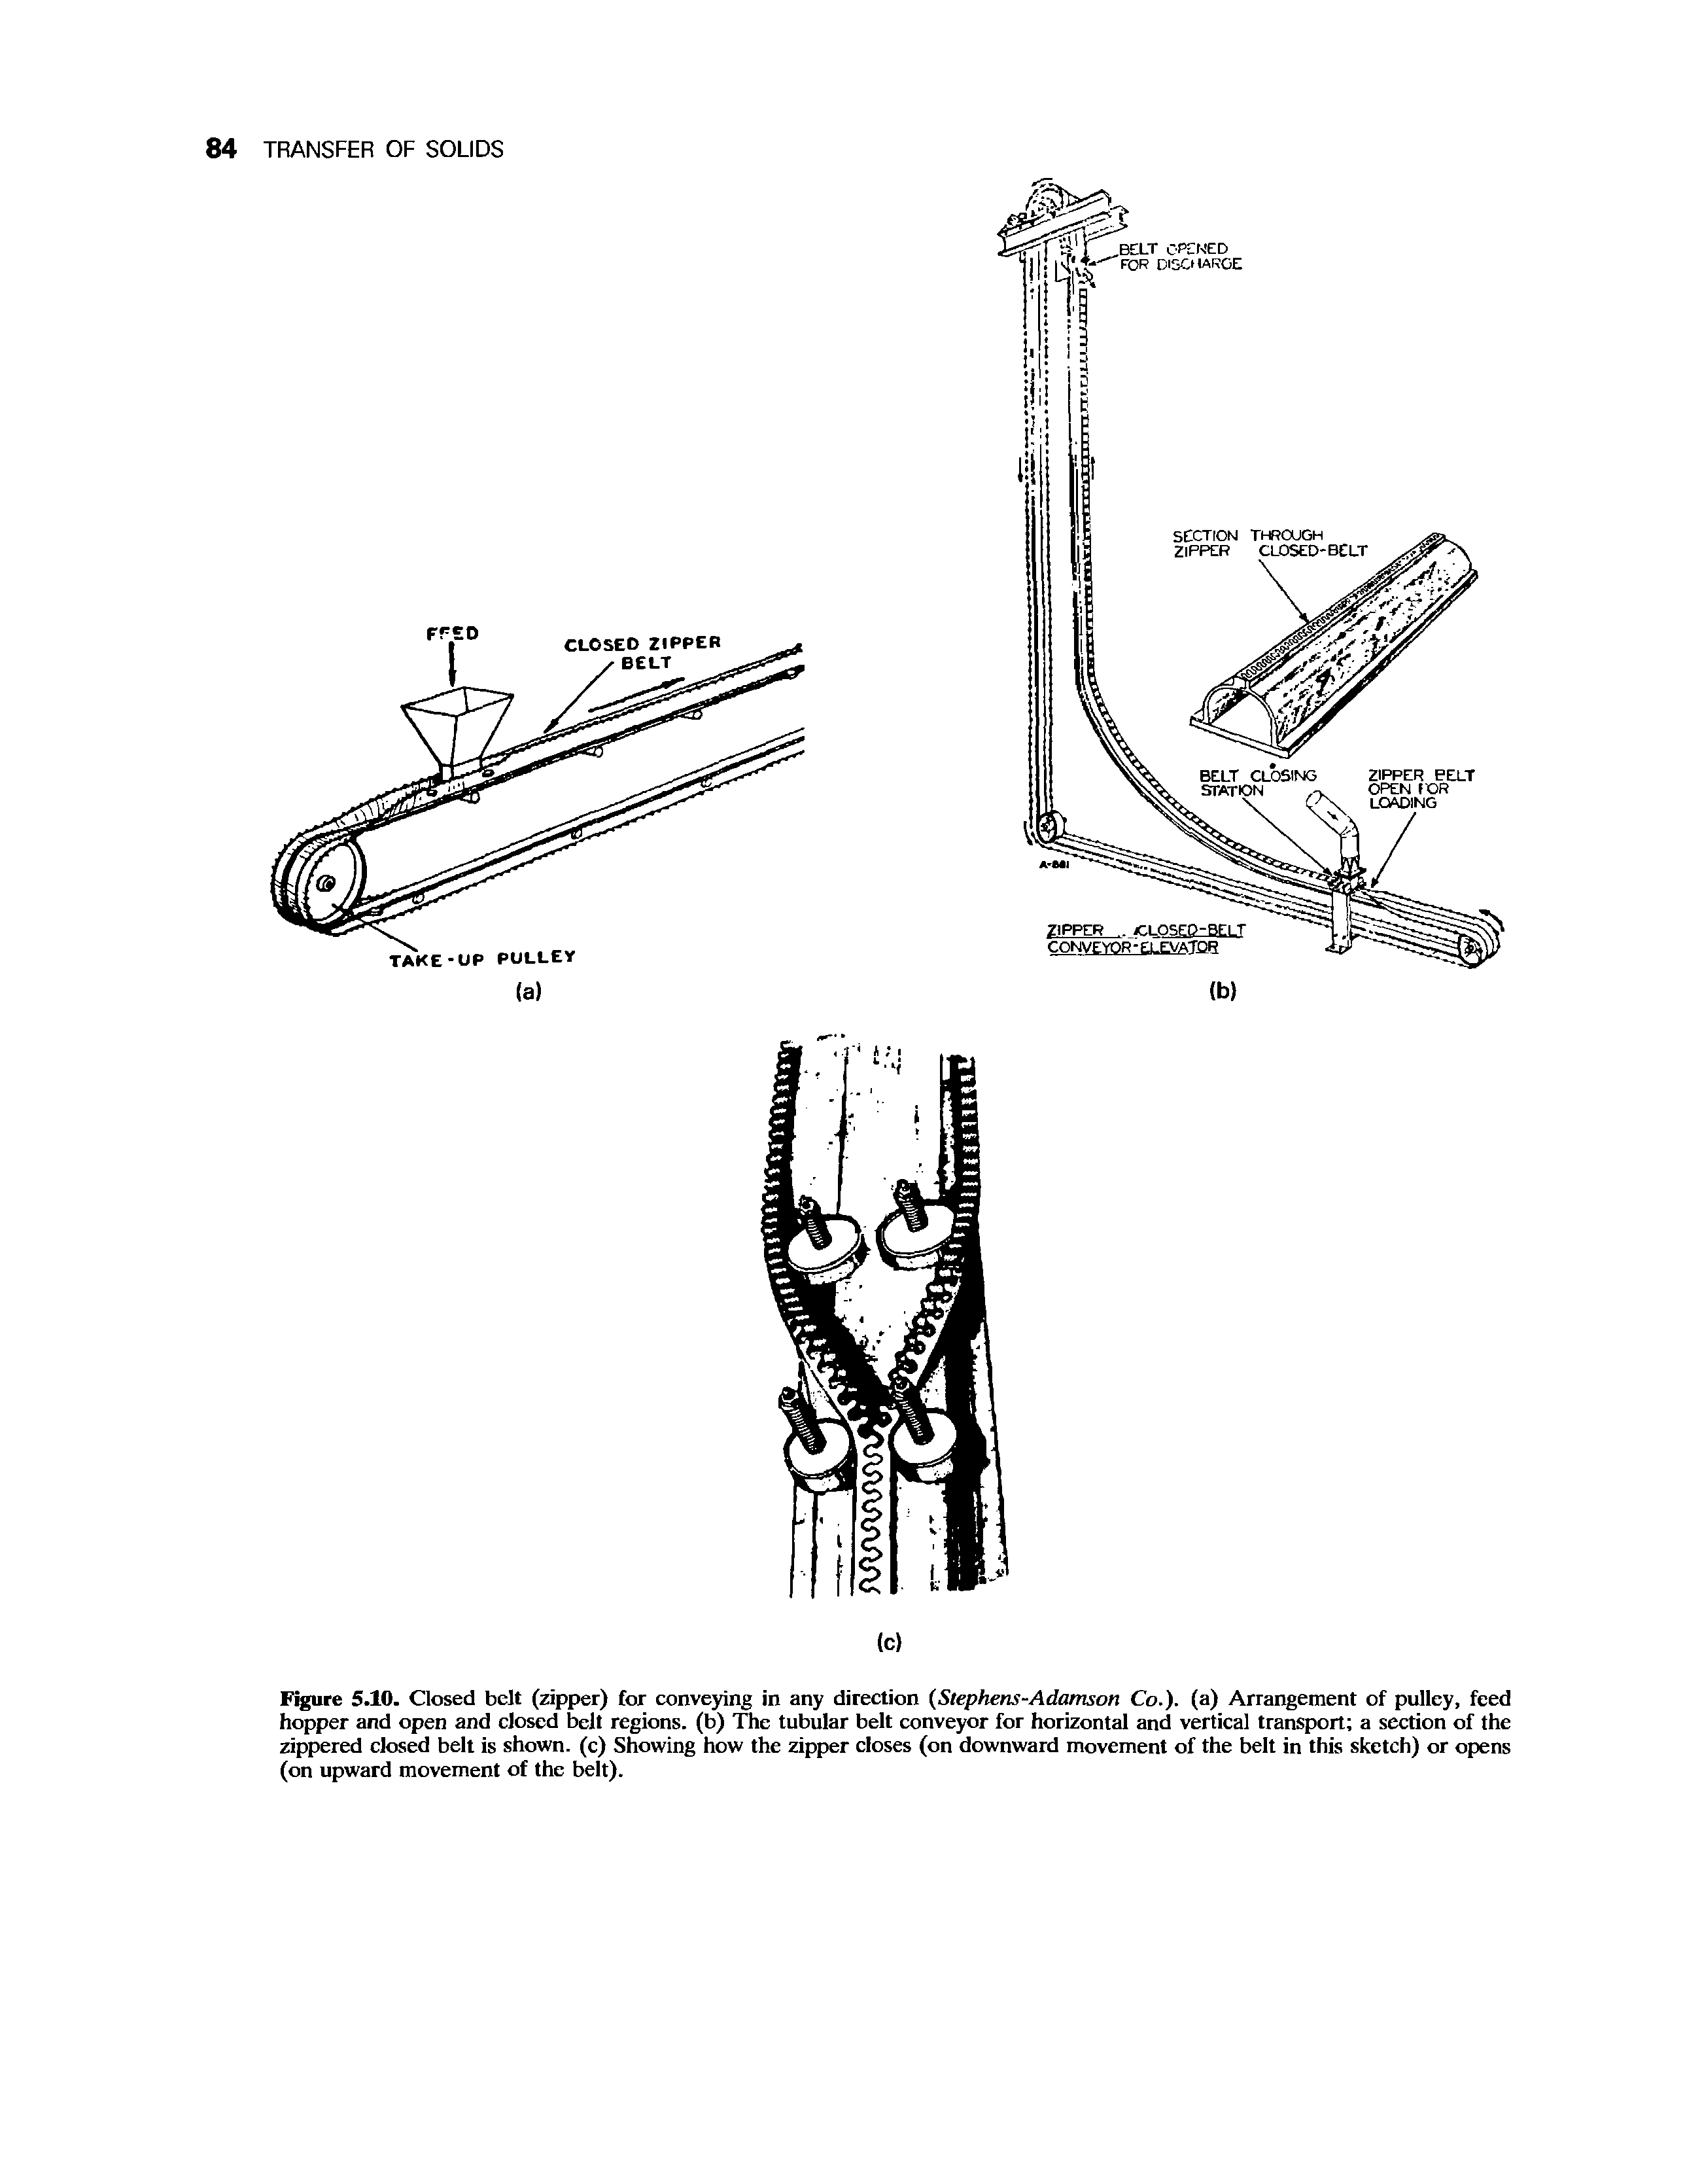 Figure 5.10. Closed belt (zipper) for conveying in any direction (Stephens-Adamson Co.), (a) Arrangement of pulley, feed hopper and open and closed belt regions, (b) The tubular belt conveyor for horizontal and vertical transport a section of the zippered closed belt is shown, (c) Showing how the zipper closes (on downward movement of the belt in this sketch) or opens (on upward movement of the belt).